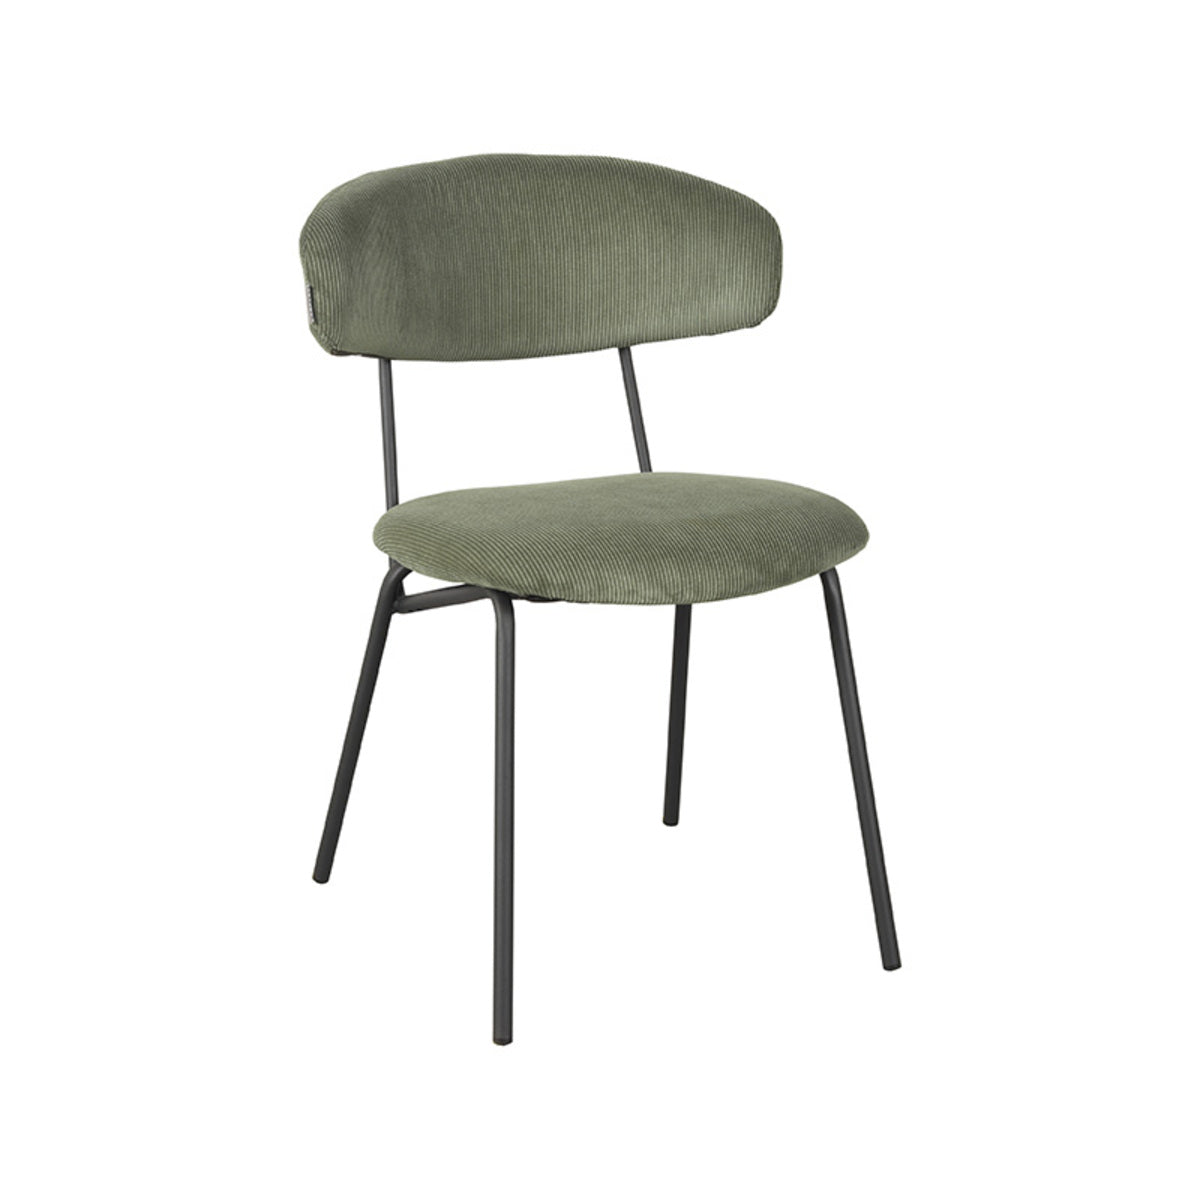 LABEL51 Dining room chair Zack - Forest - Ribcord | 2 pcs